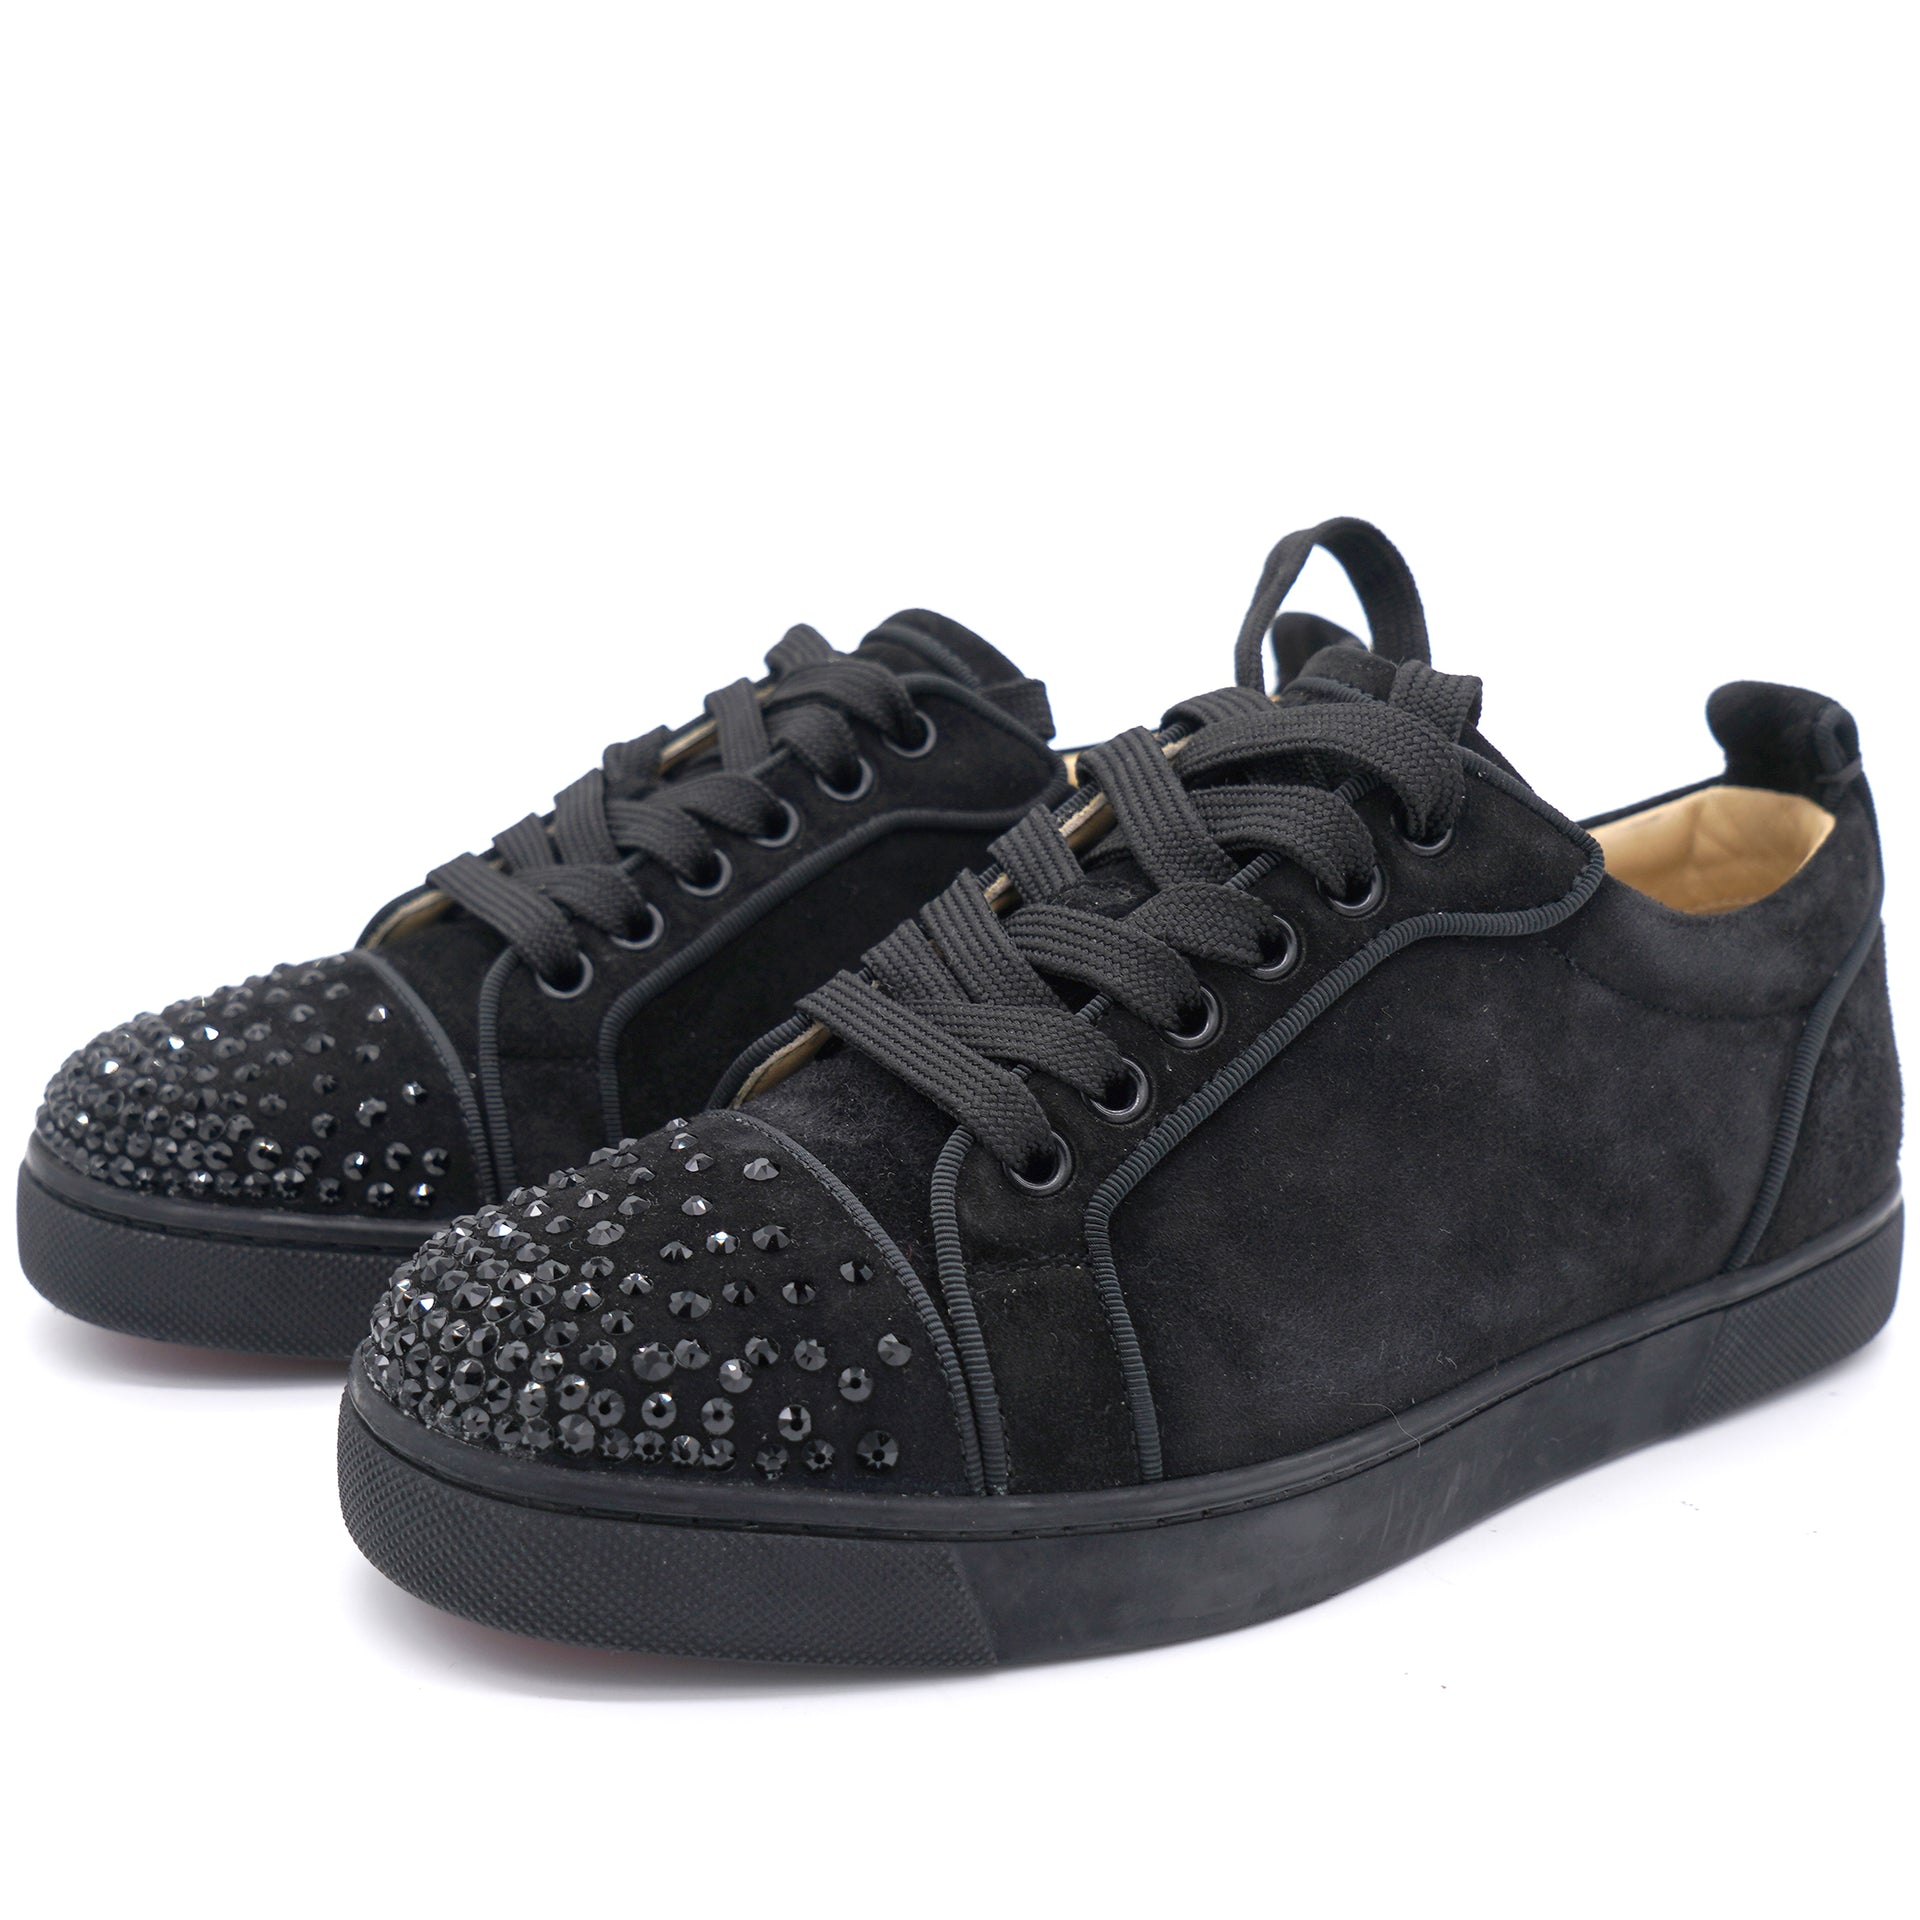 CHRISTIAN LOUBOUTIN Louis Junior Degra Strass Black Suede Low-Top Sneakers  Size 36.5